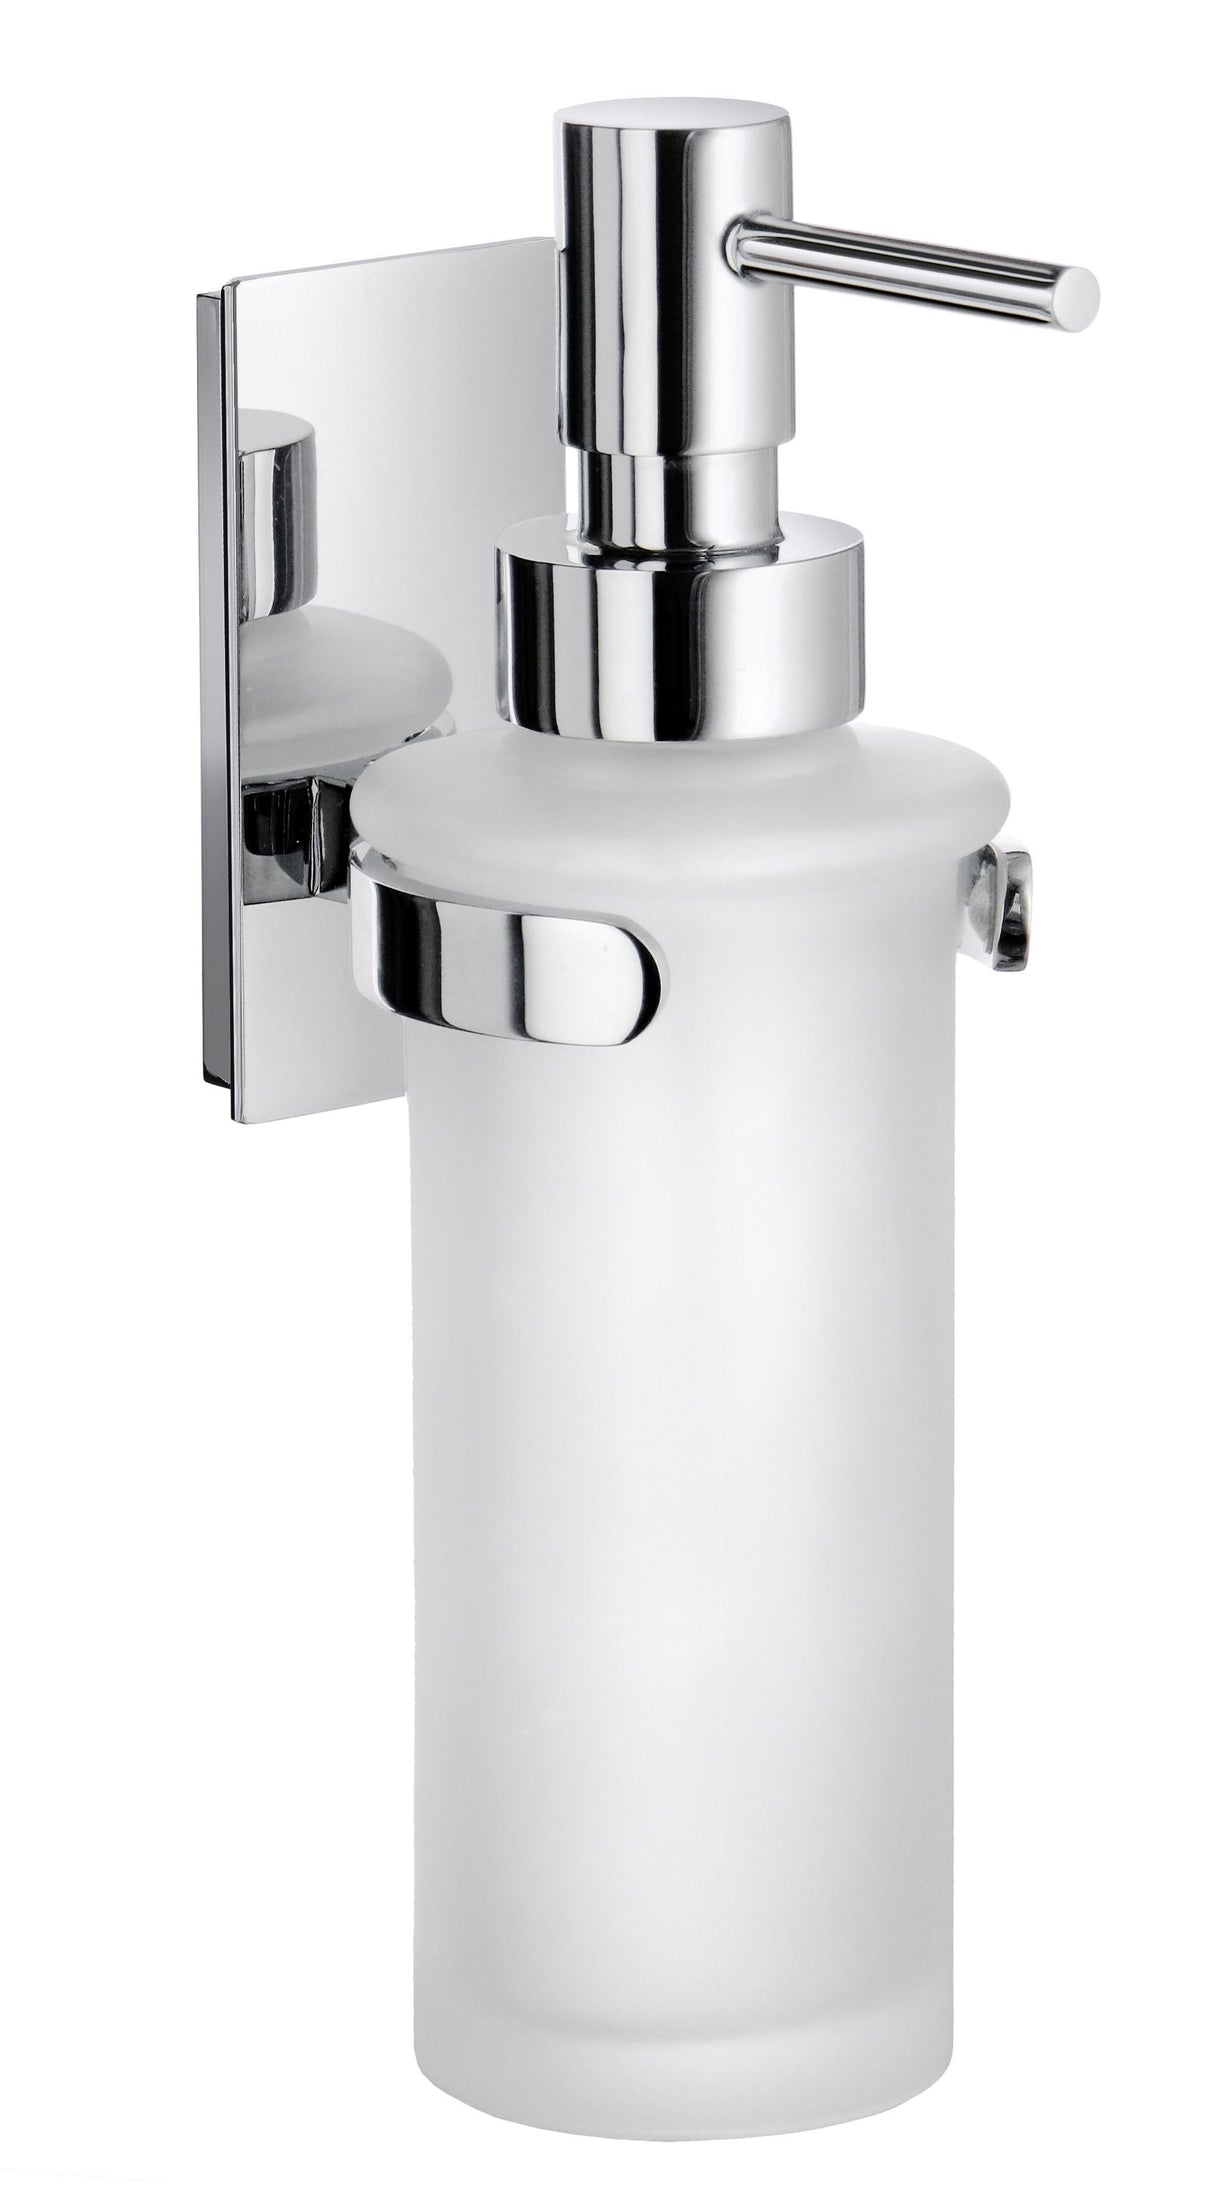 Smedbo Pool Holder with Frosted Glass Soap Dispenser in Polished Chrome